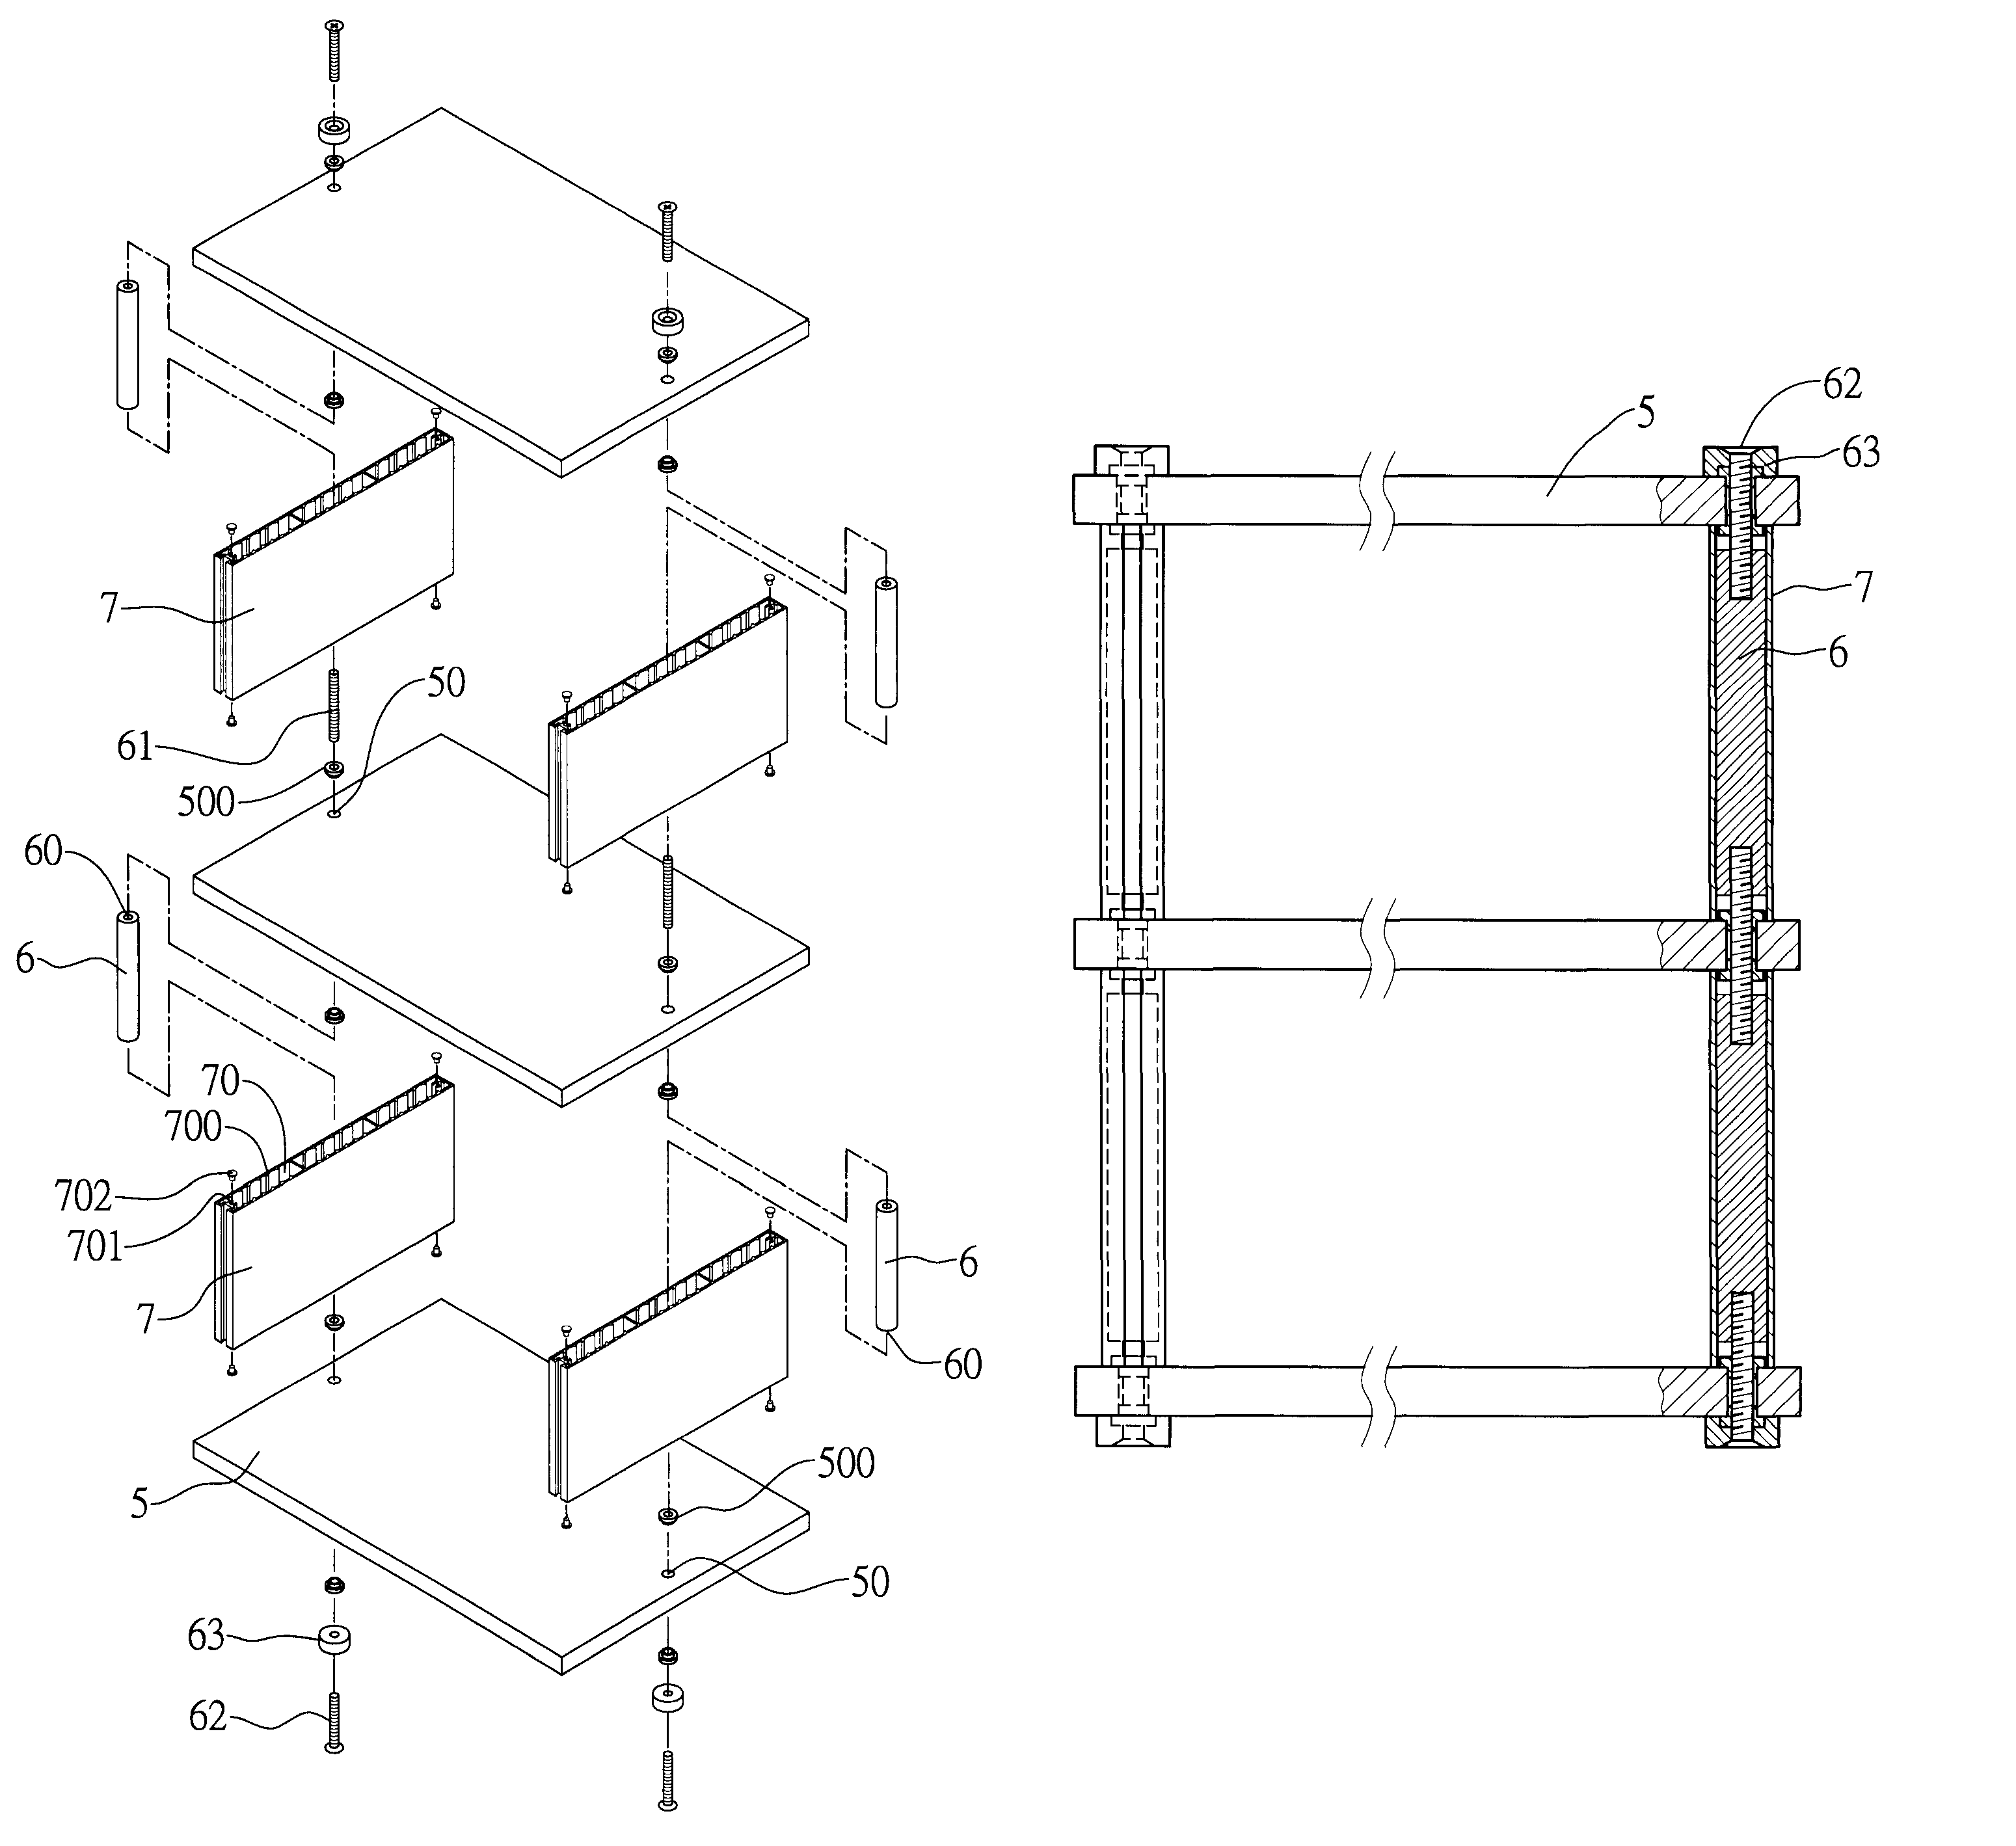 Interlocking component assembly for an expandable rack assembly